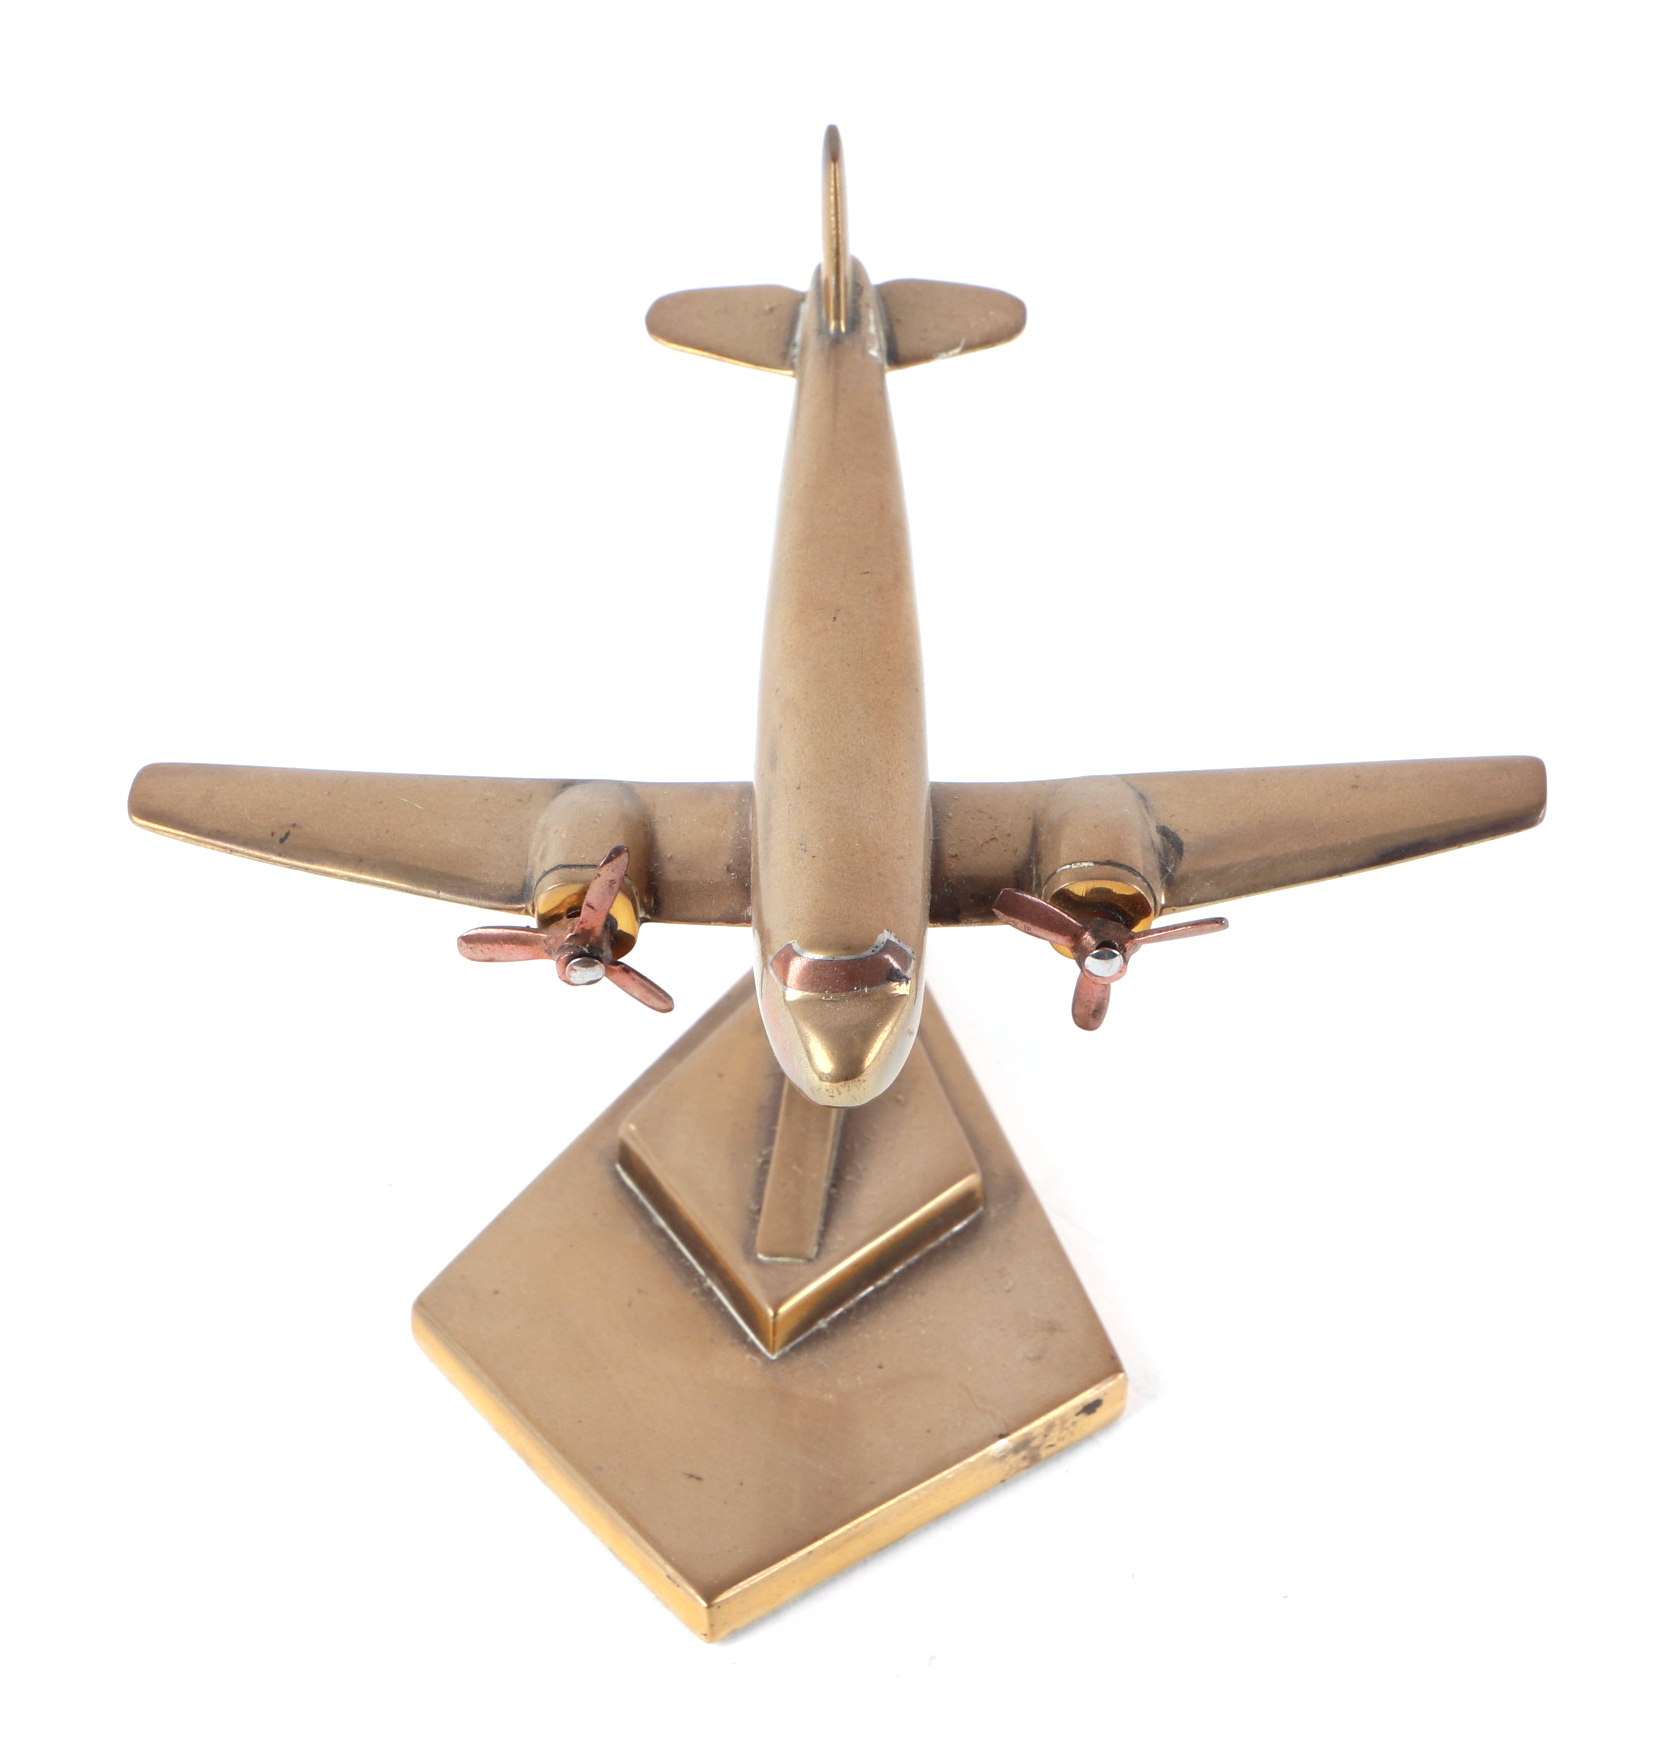 A trench art cast brass model of a DC3 Decoata aircraft, mounted on a brass plinth, wingspan 15cm. - Image 2 of 2